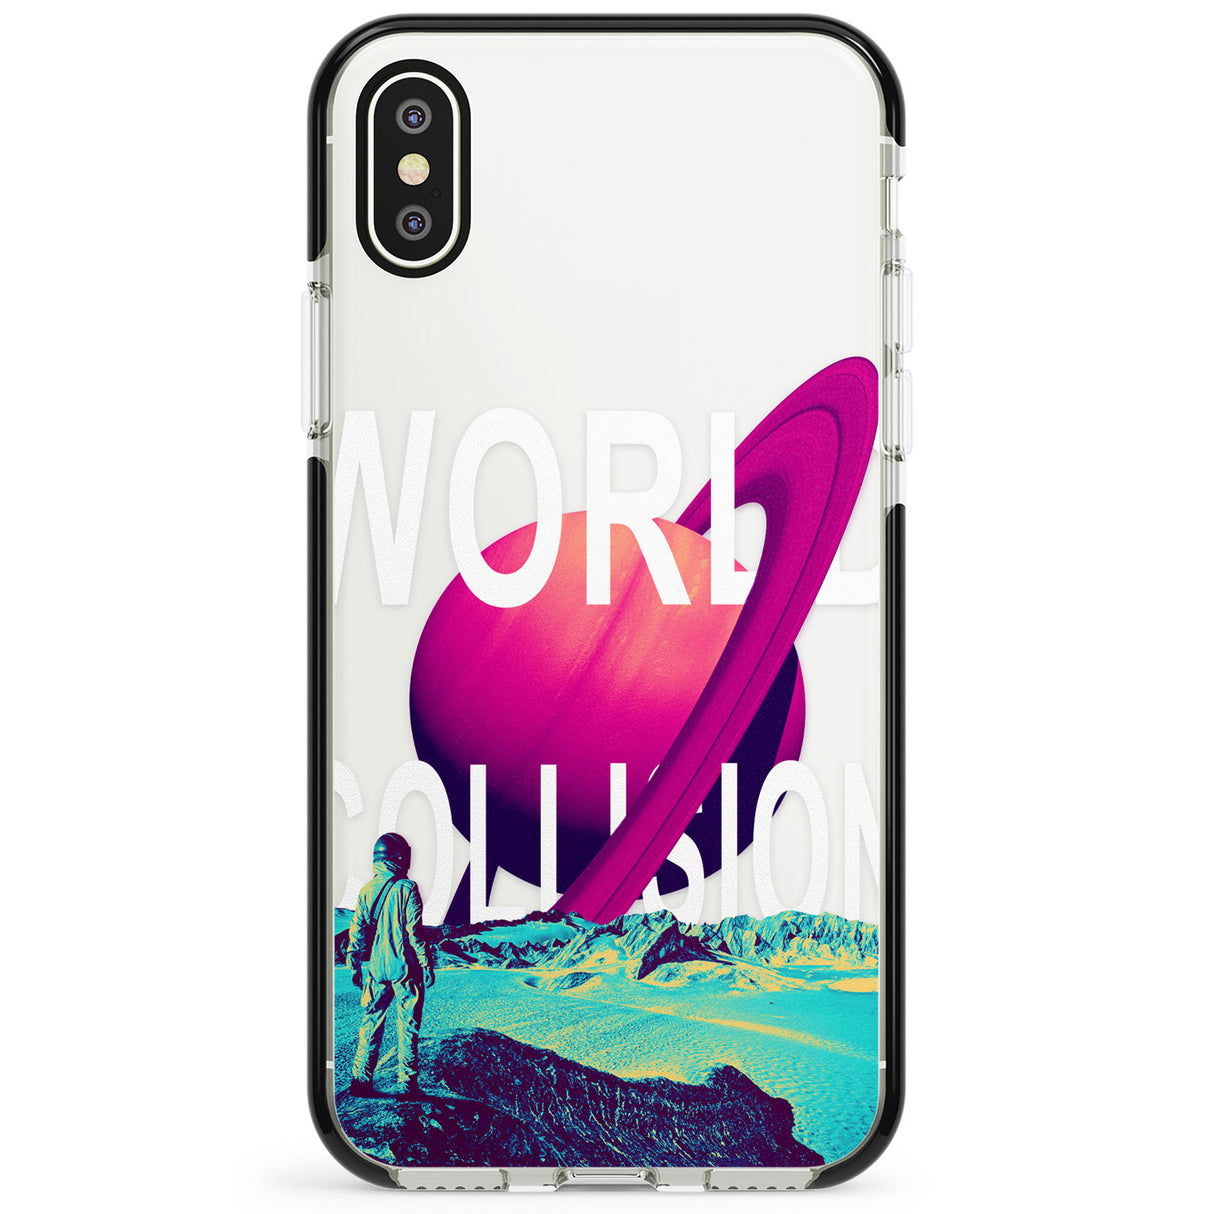 World Collision Phone Case for iPhone X XS Max XR